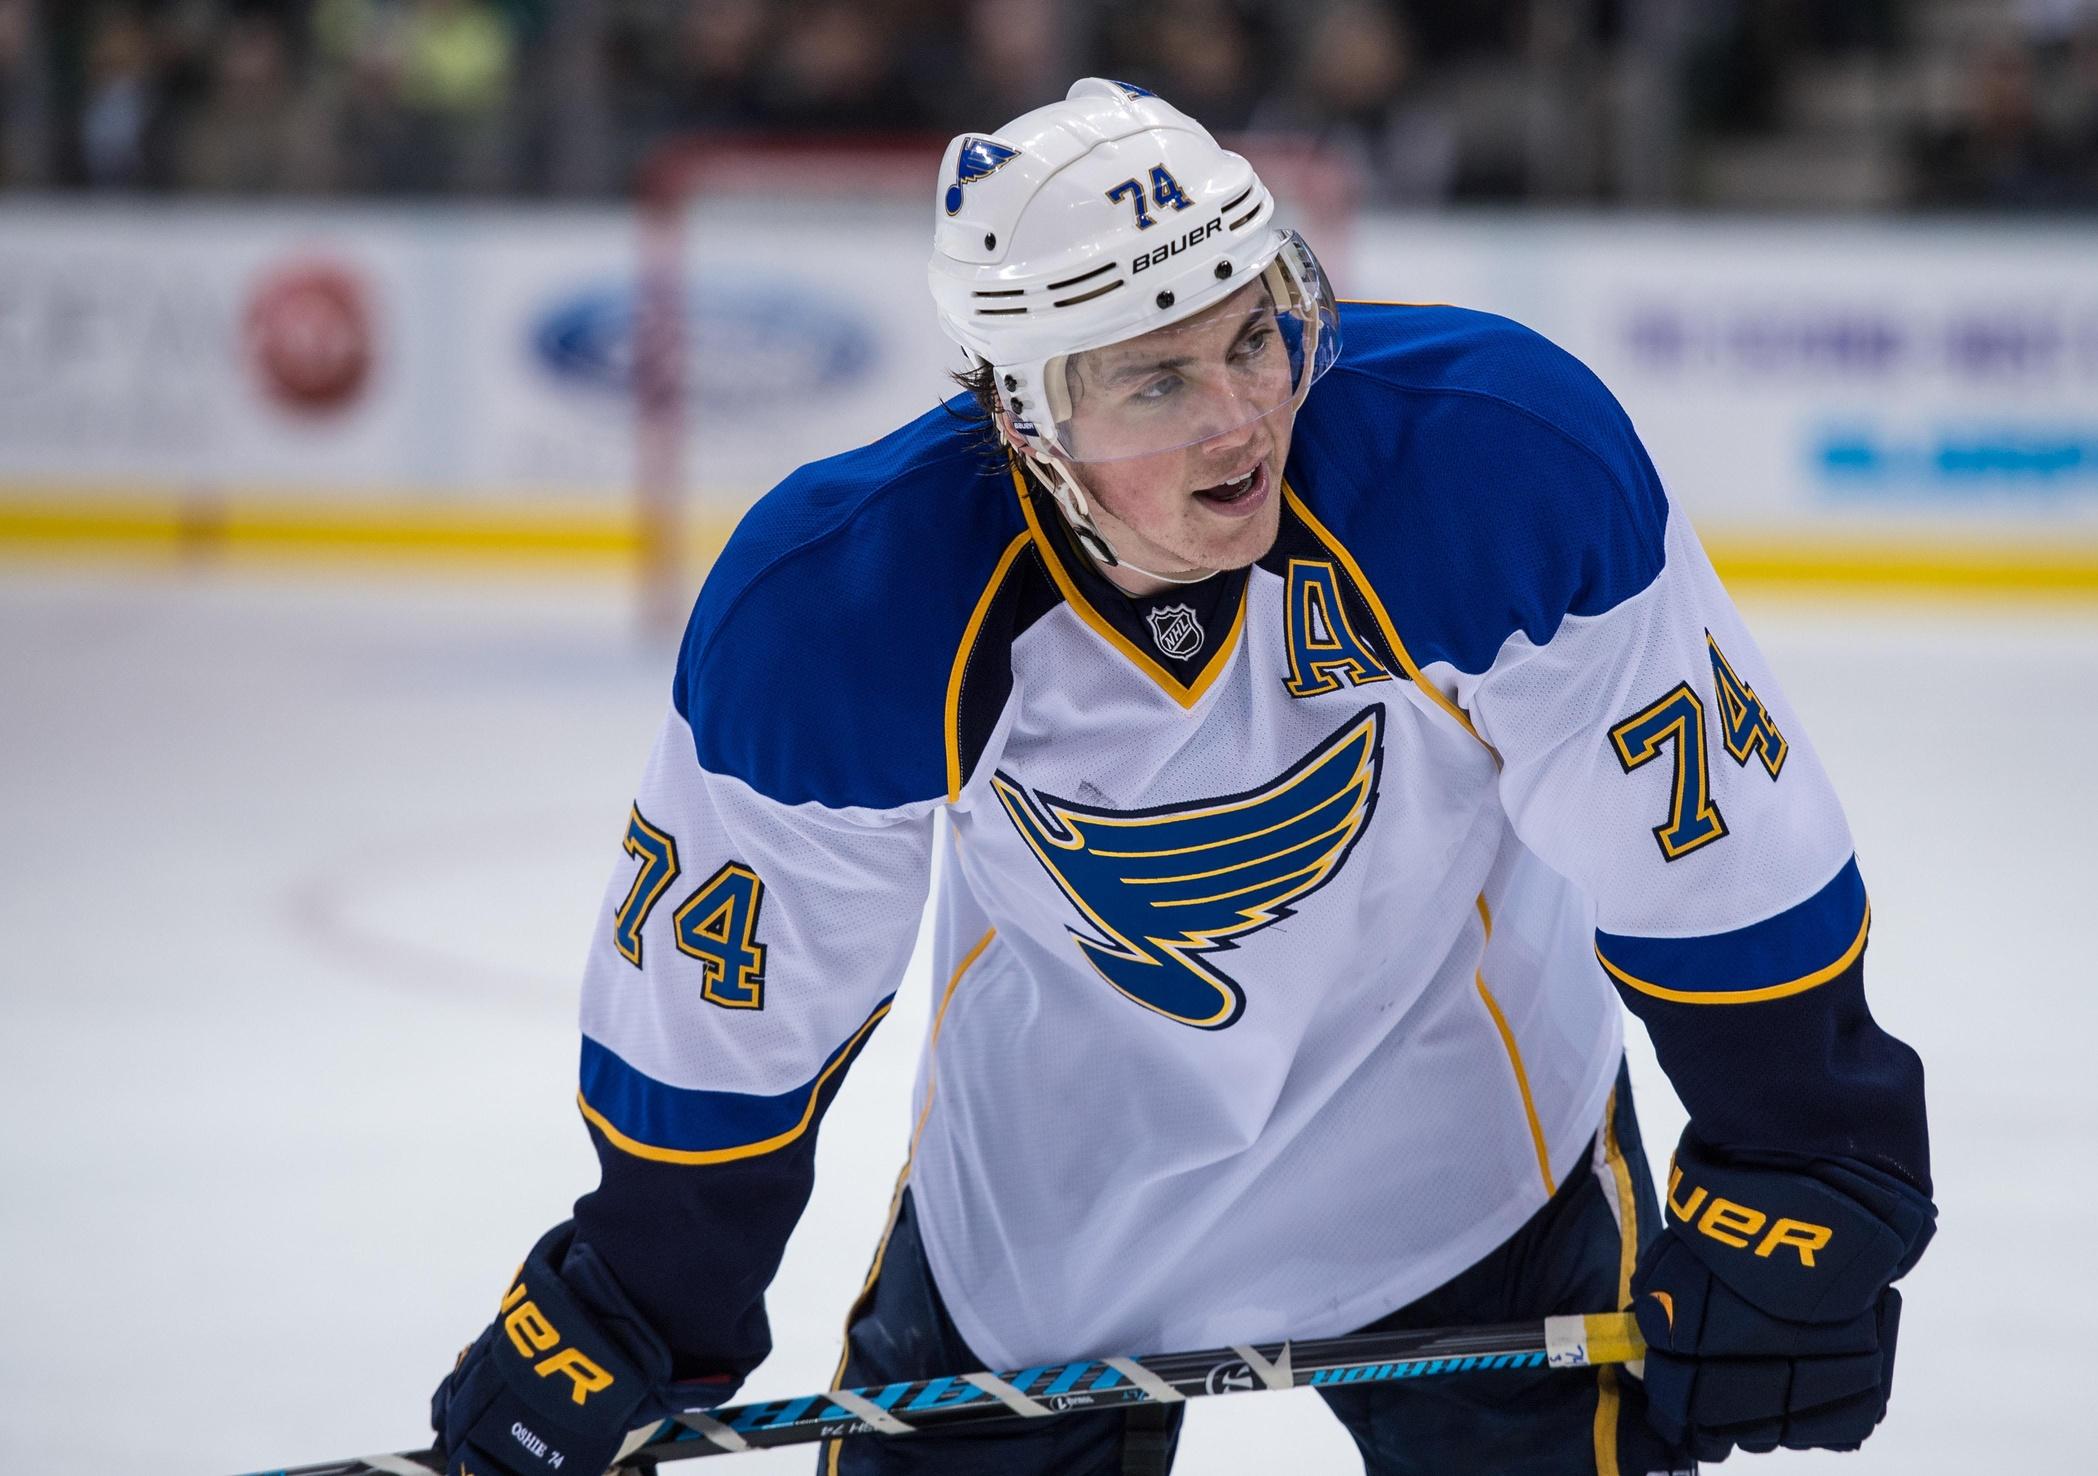 Oshie Does It Again Lifts Blues to Win over Wild. The Pink Puck